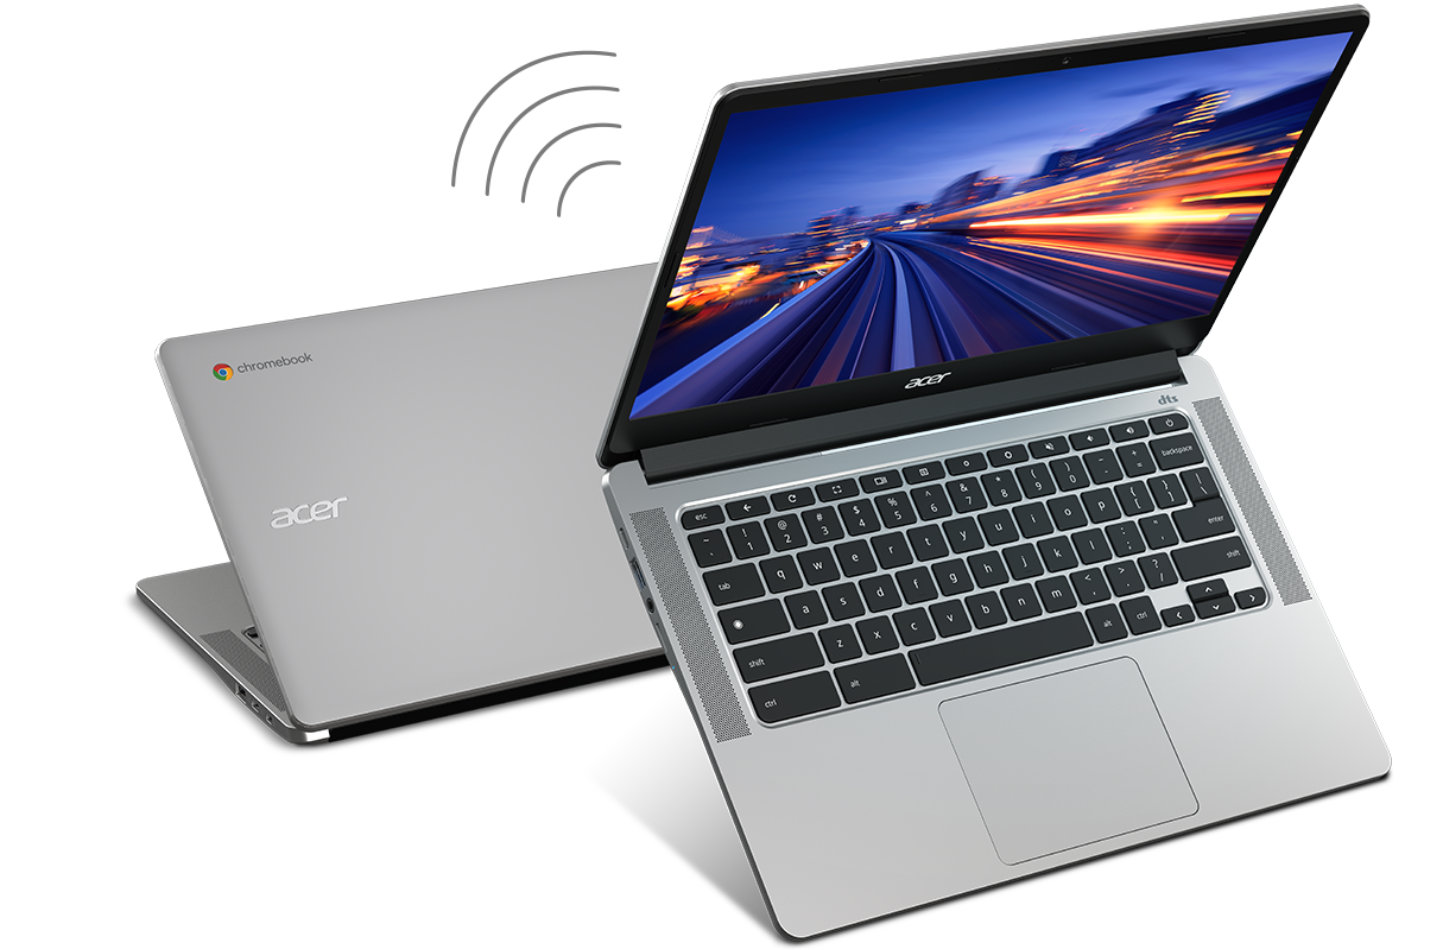 acer-chromebook-314-blazing-fast-connection-m:Static-KSP-Image-Right-Left-XL